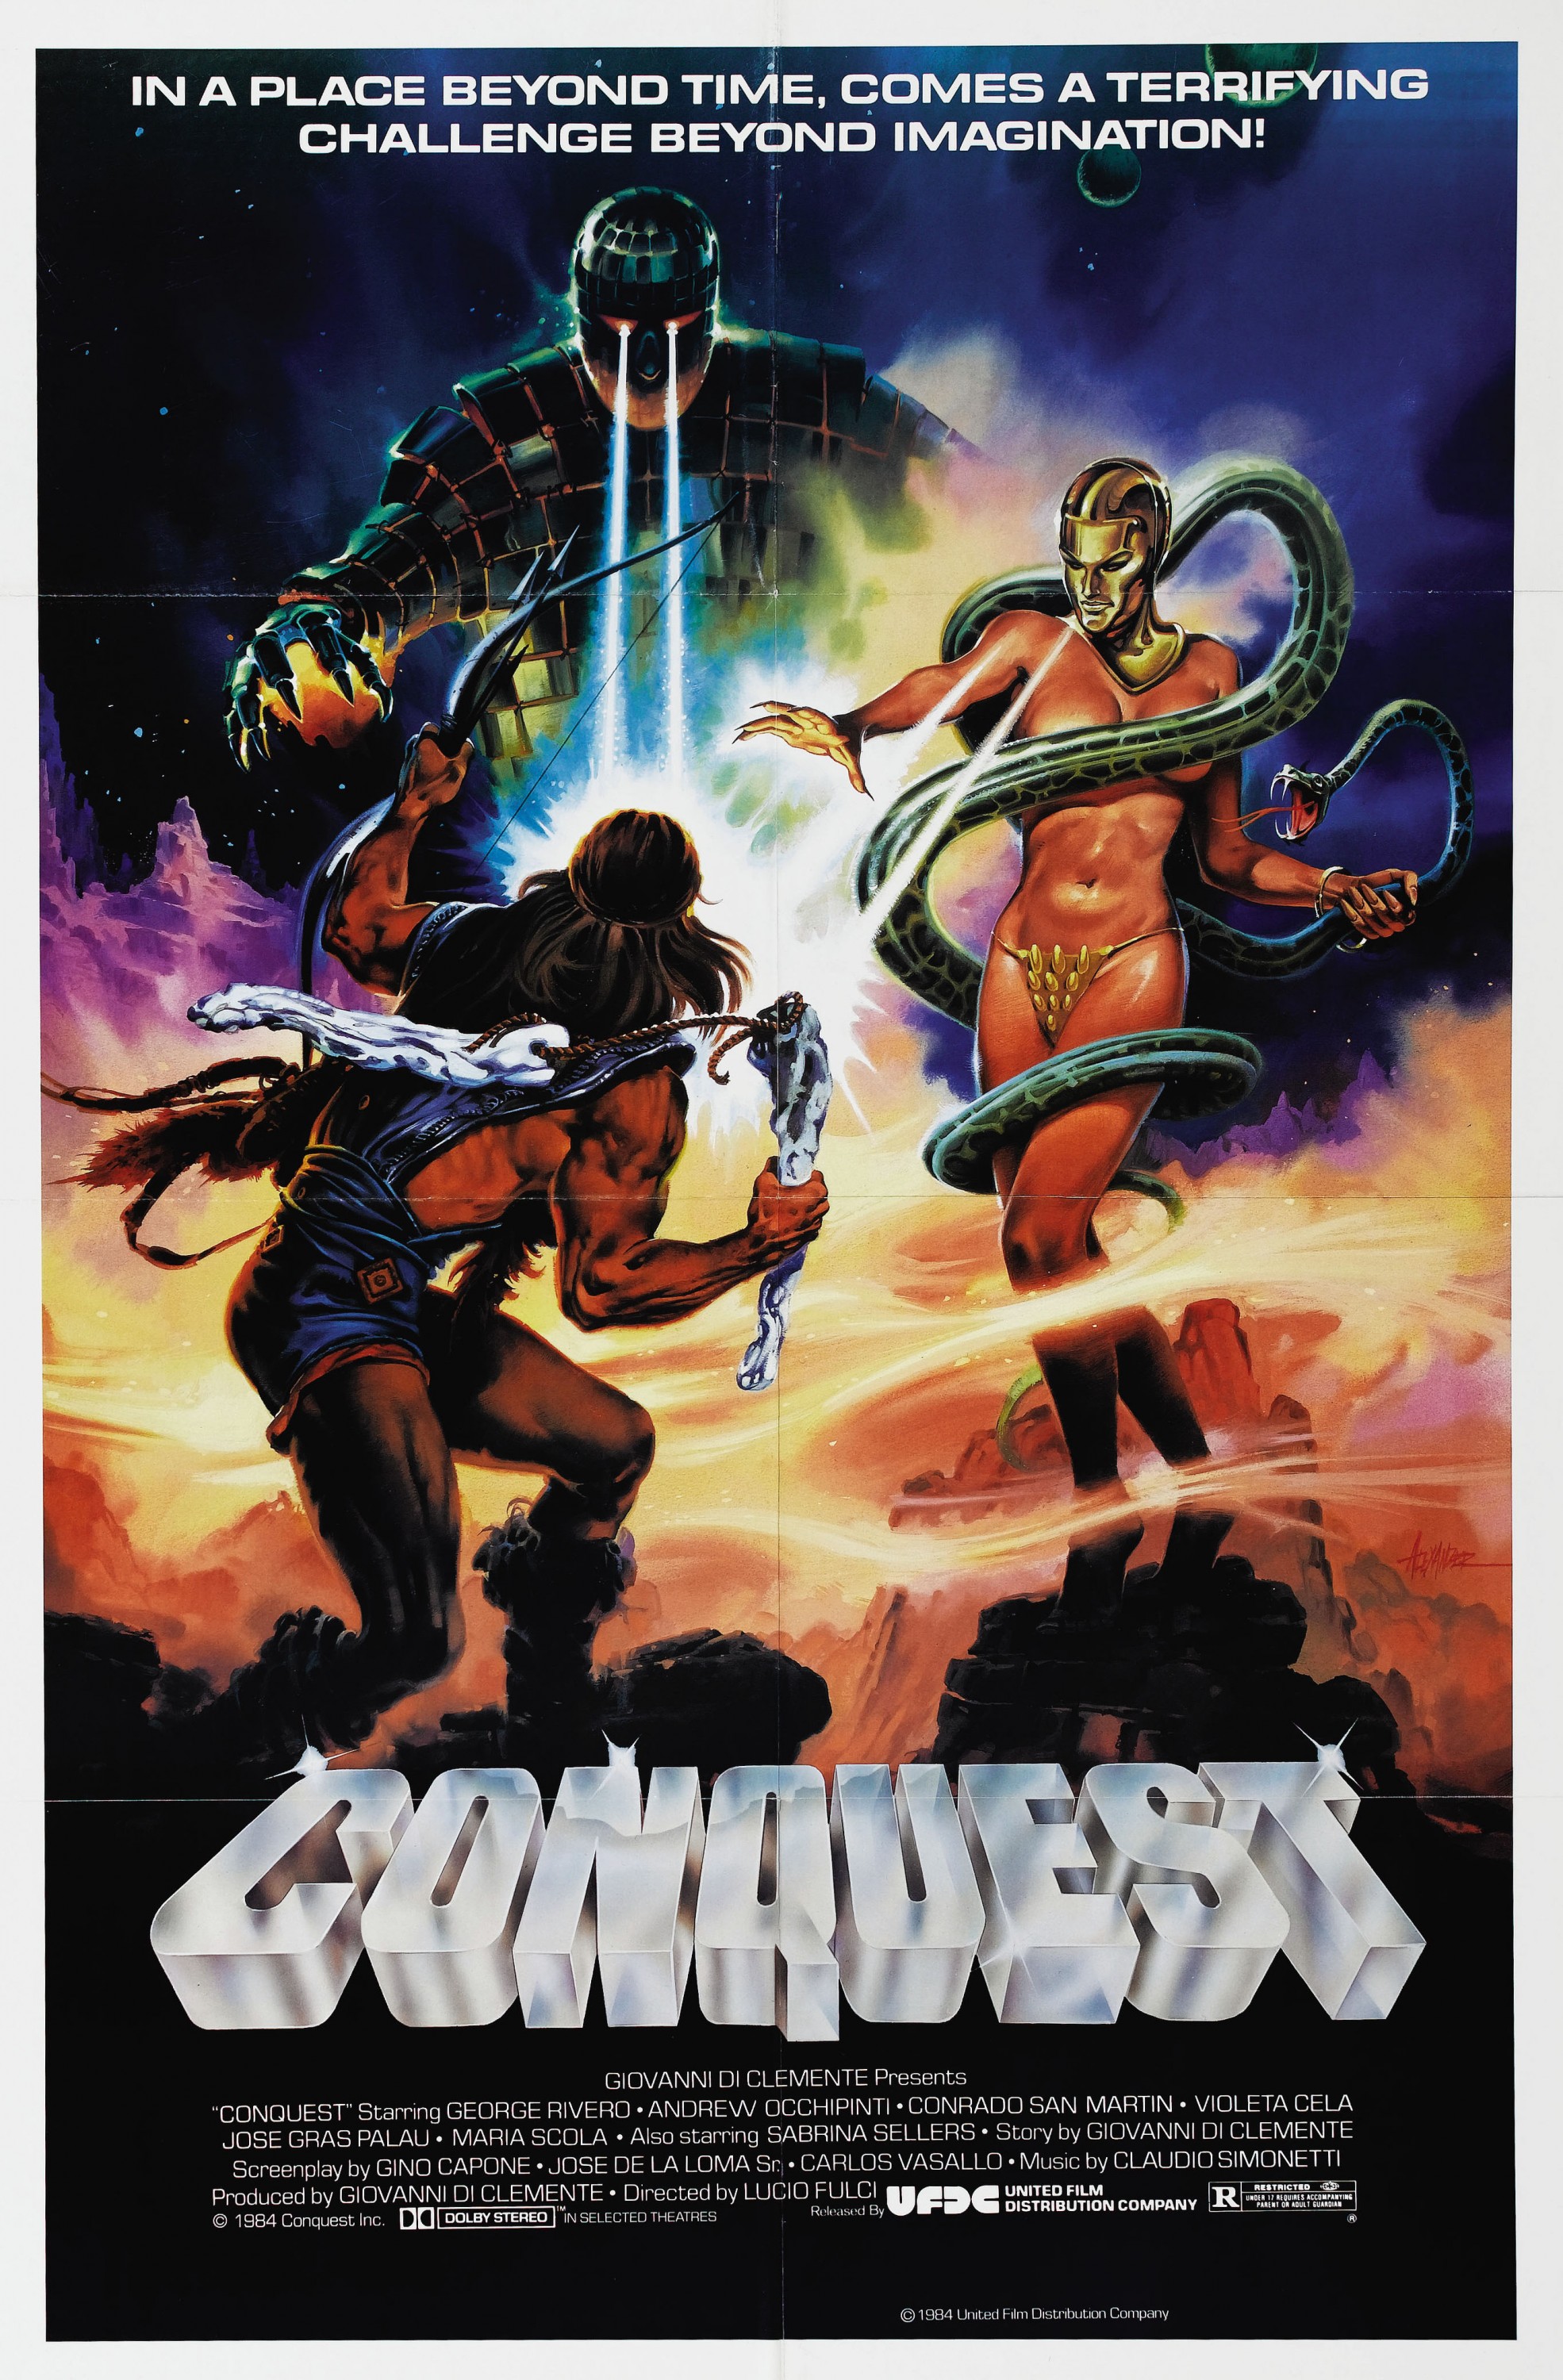 Mega Sized Movie Poster Image for Conquest 